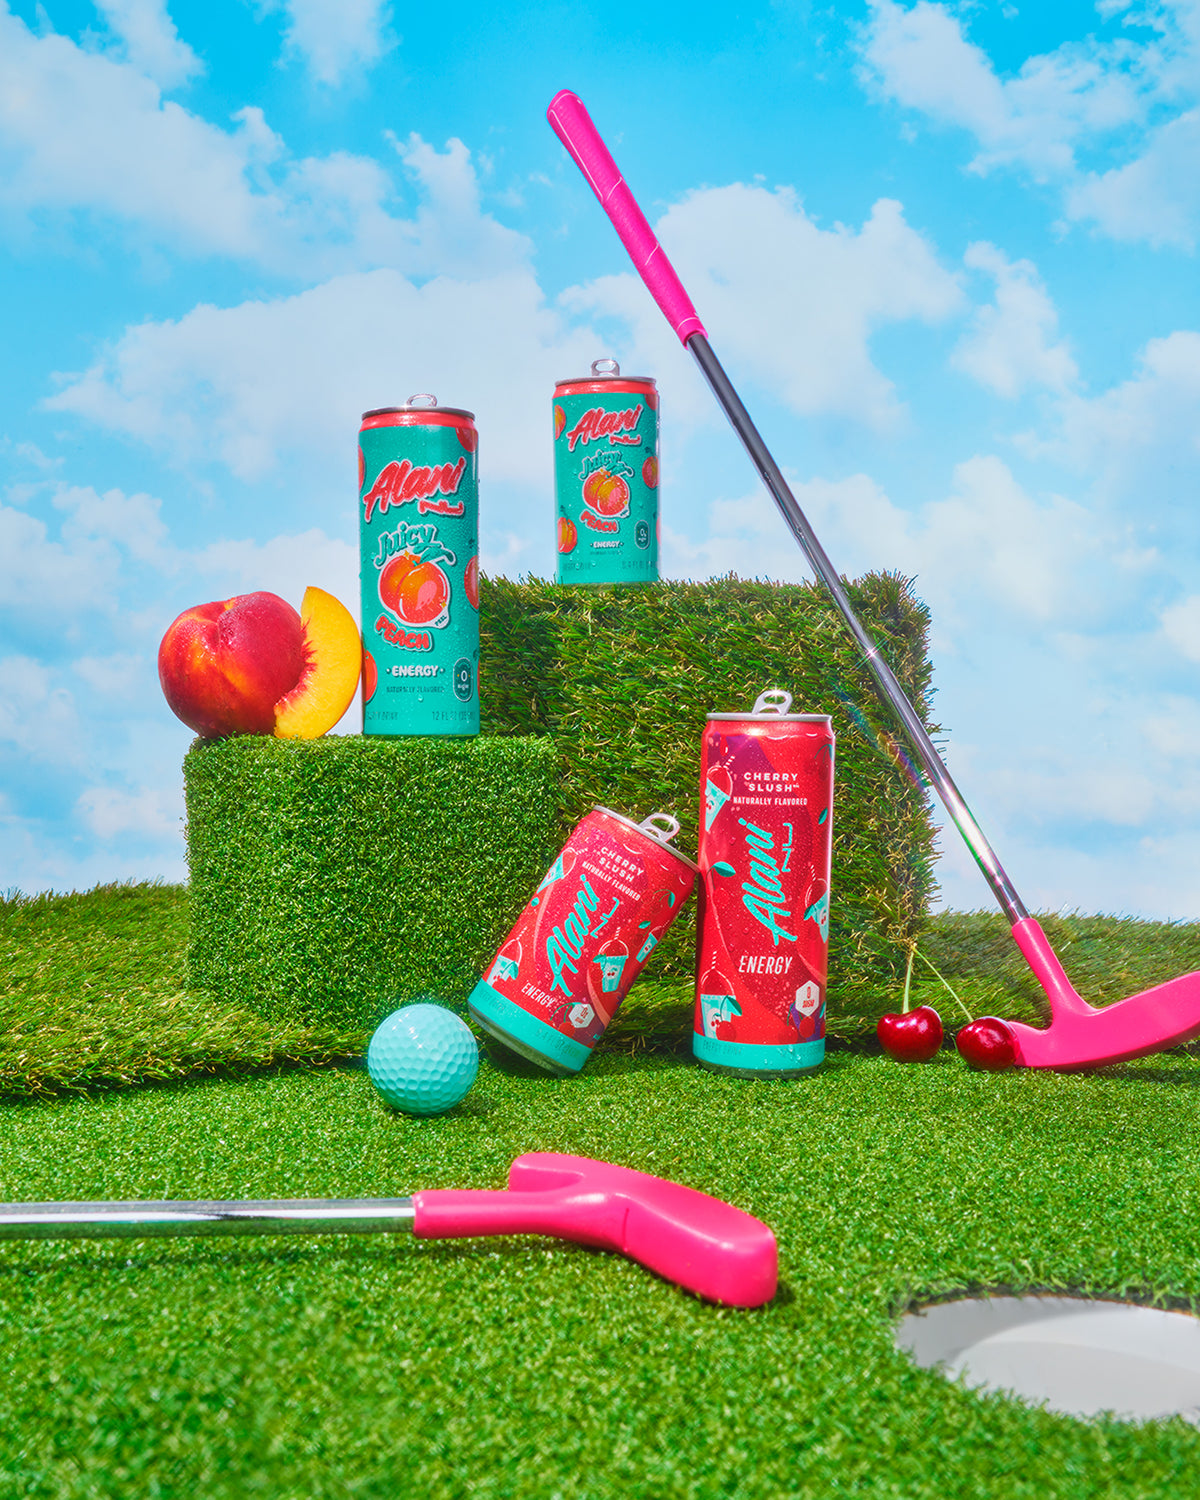 A set of golf clubs next to Mini Energy in Cherry Slush and Juicy Peach flavor.